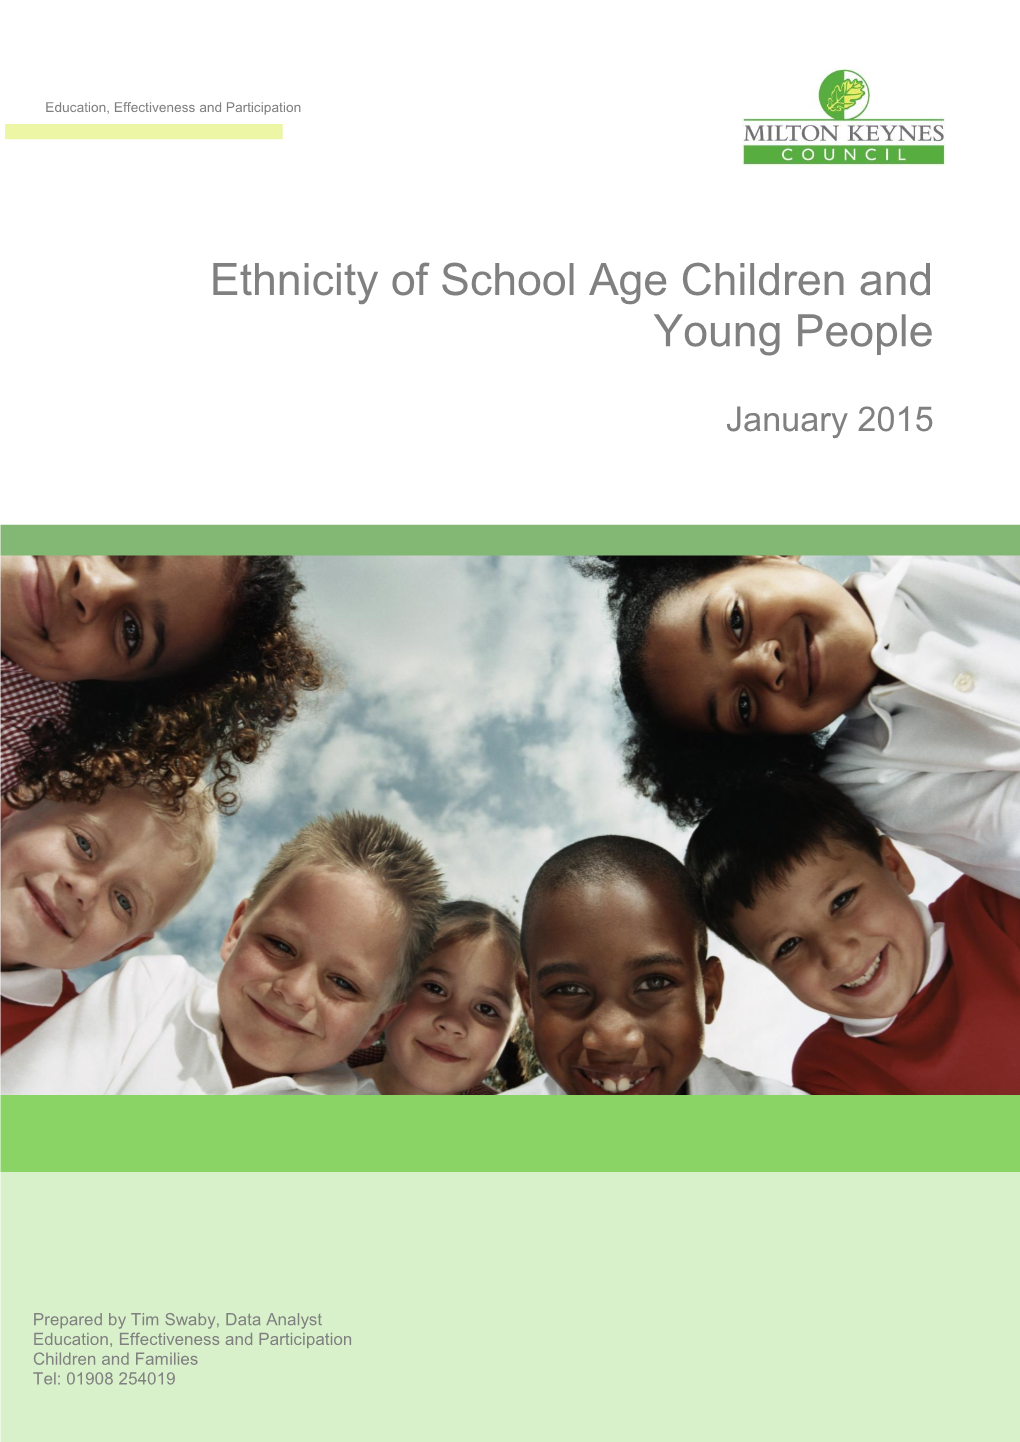 Ethnicity of School Age Children and Young People